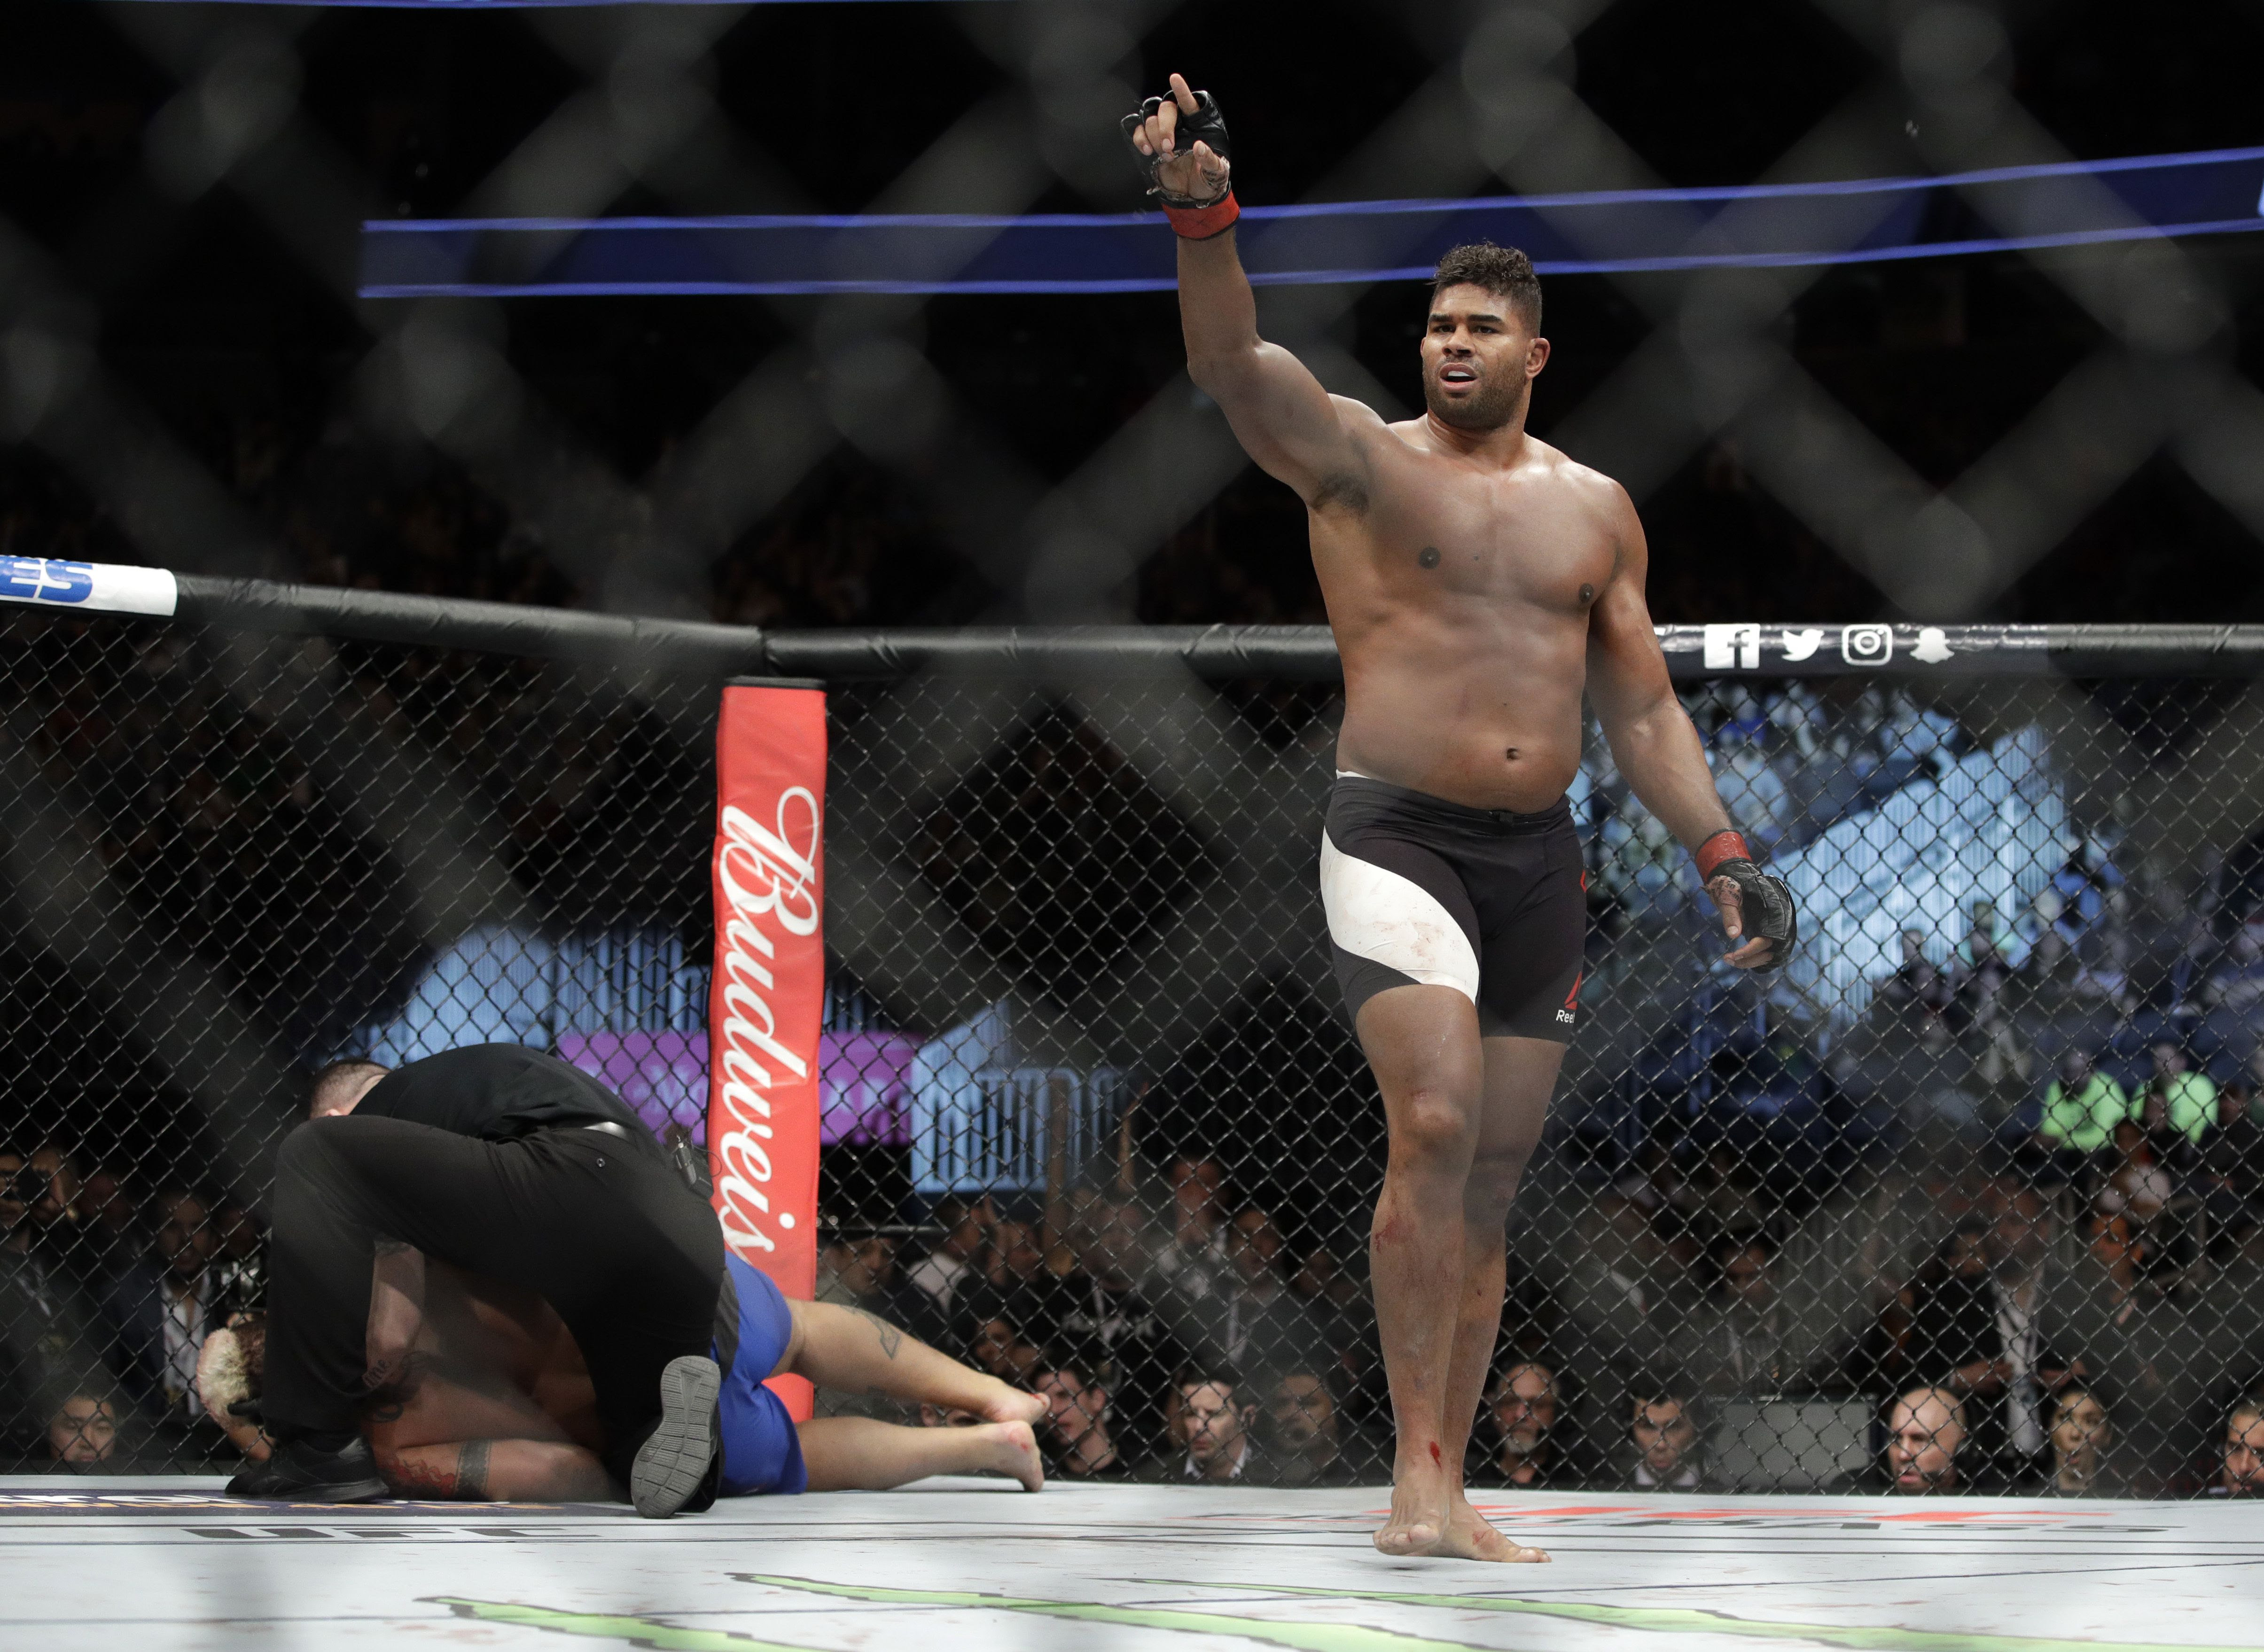 Mma news & results for the ultimate fighting championship (ufc), strikeforce & more mixed martial arts fights. Ufc Fight Night Overeem Vs Volkov Live Stream 2 6 21 How To Watch Ufc Online Fight Card Time Tv Channel Nj Com